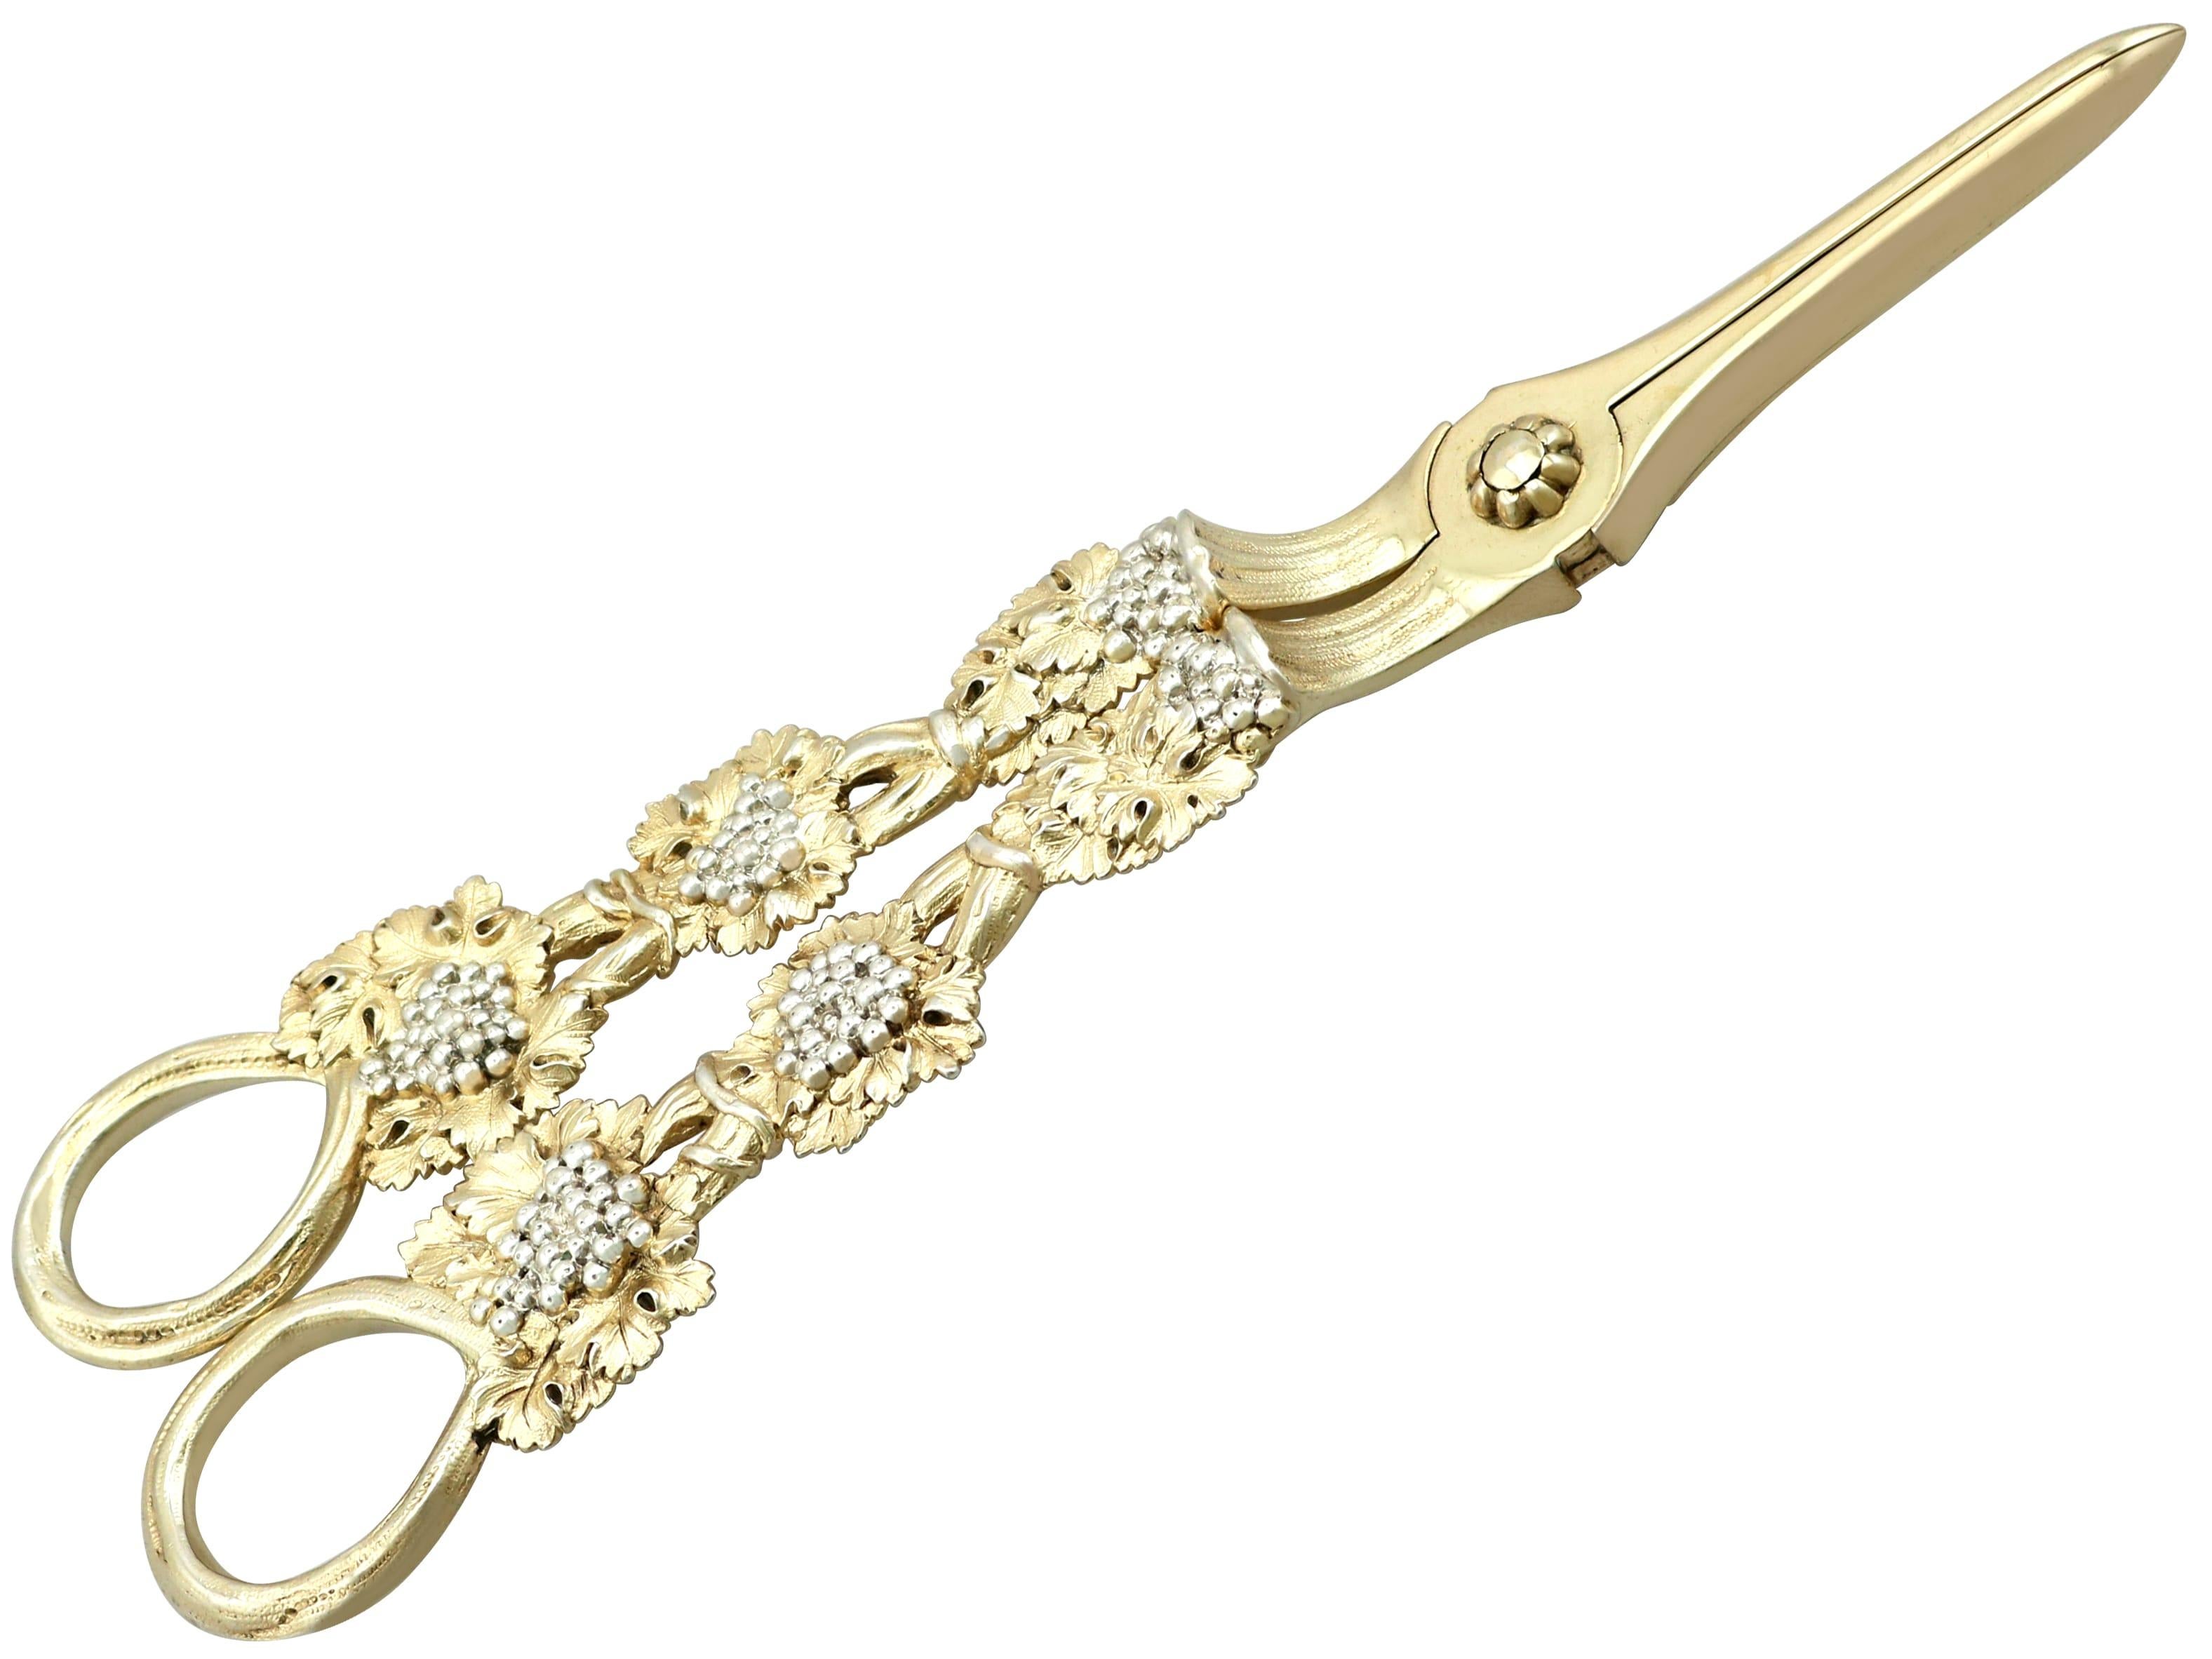 Antique George IV (1827) Sterling Silver Gilt Grape Shears In Excellent Condition For Sale In Jesmond, Newcastle Upon Tyne